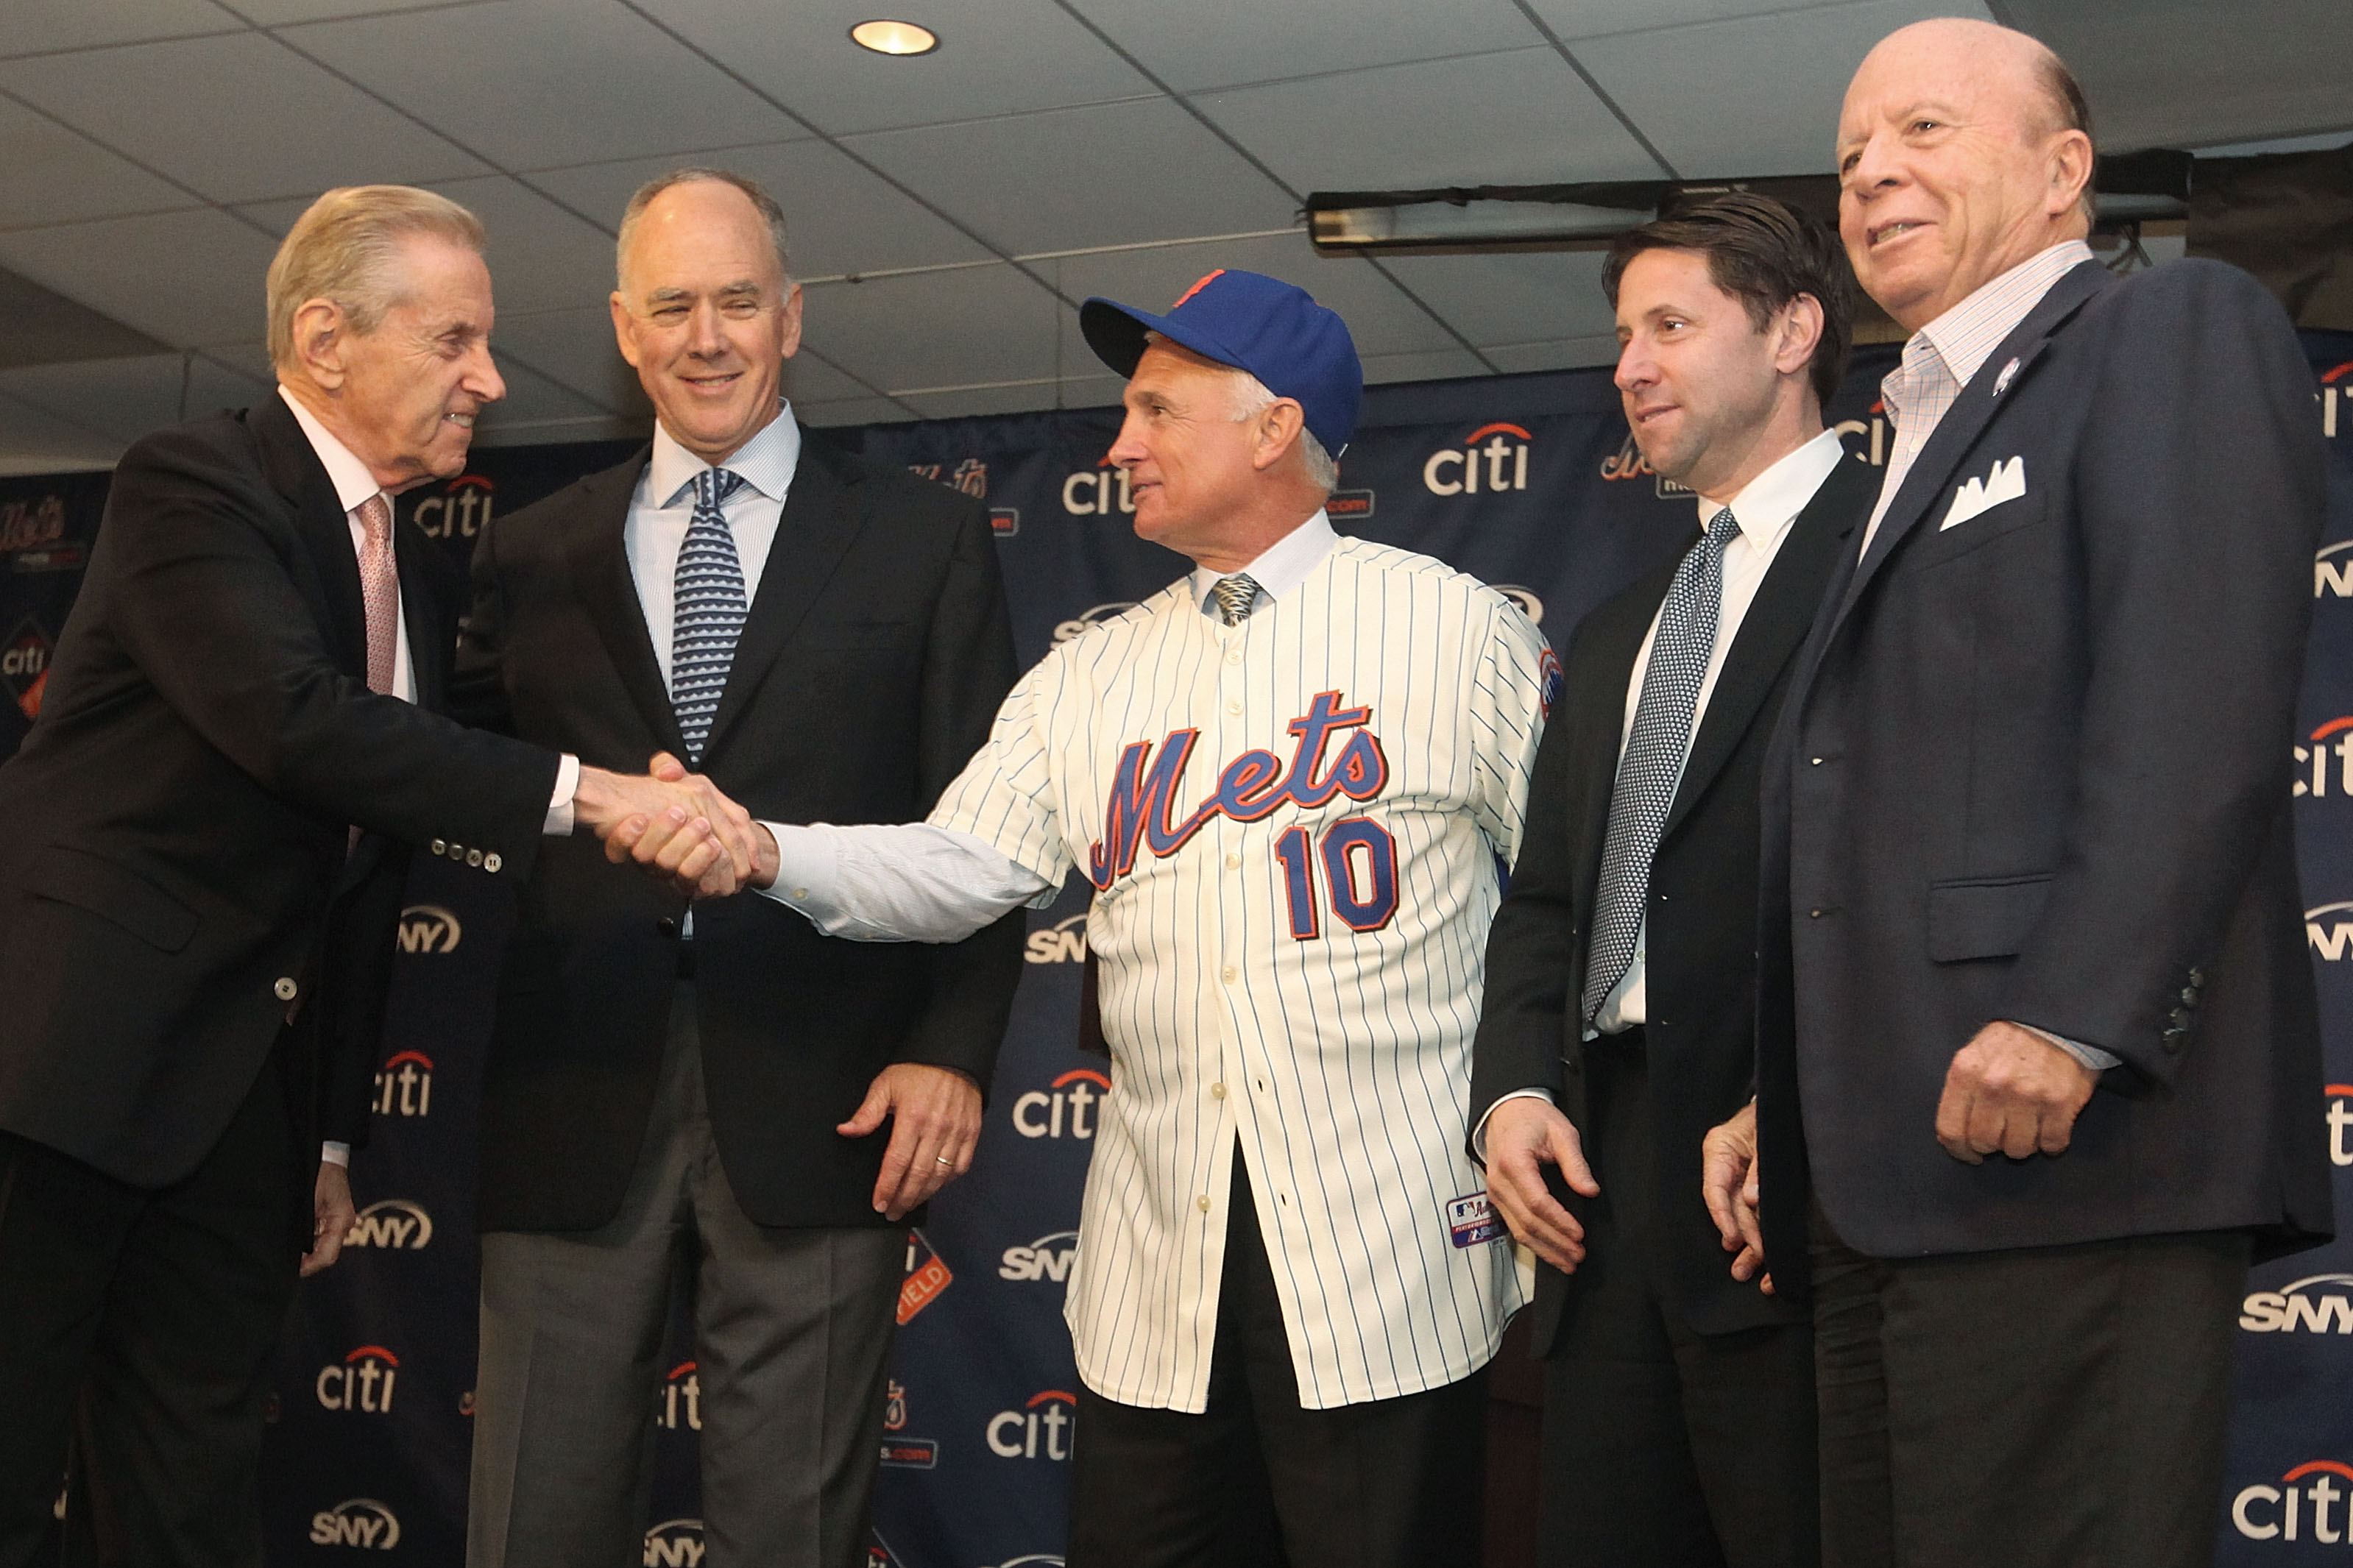 NEW YORK - NOVEMBER 23: Fred Wilpon, General Manager Sandy Alderson,  New York Mets new manager Terry Collins, Jeff Wilpon and Saul Katz pose for pictures during a press conference  at Citi Field on November 23, 2010 in the Flushing neighborhood, of the Q